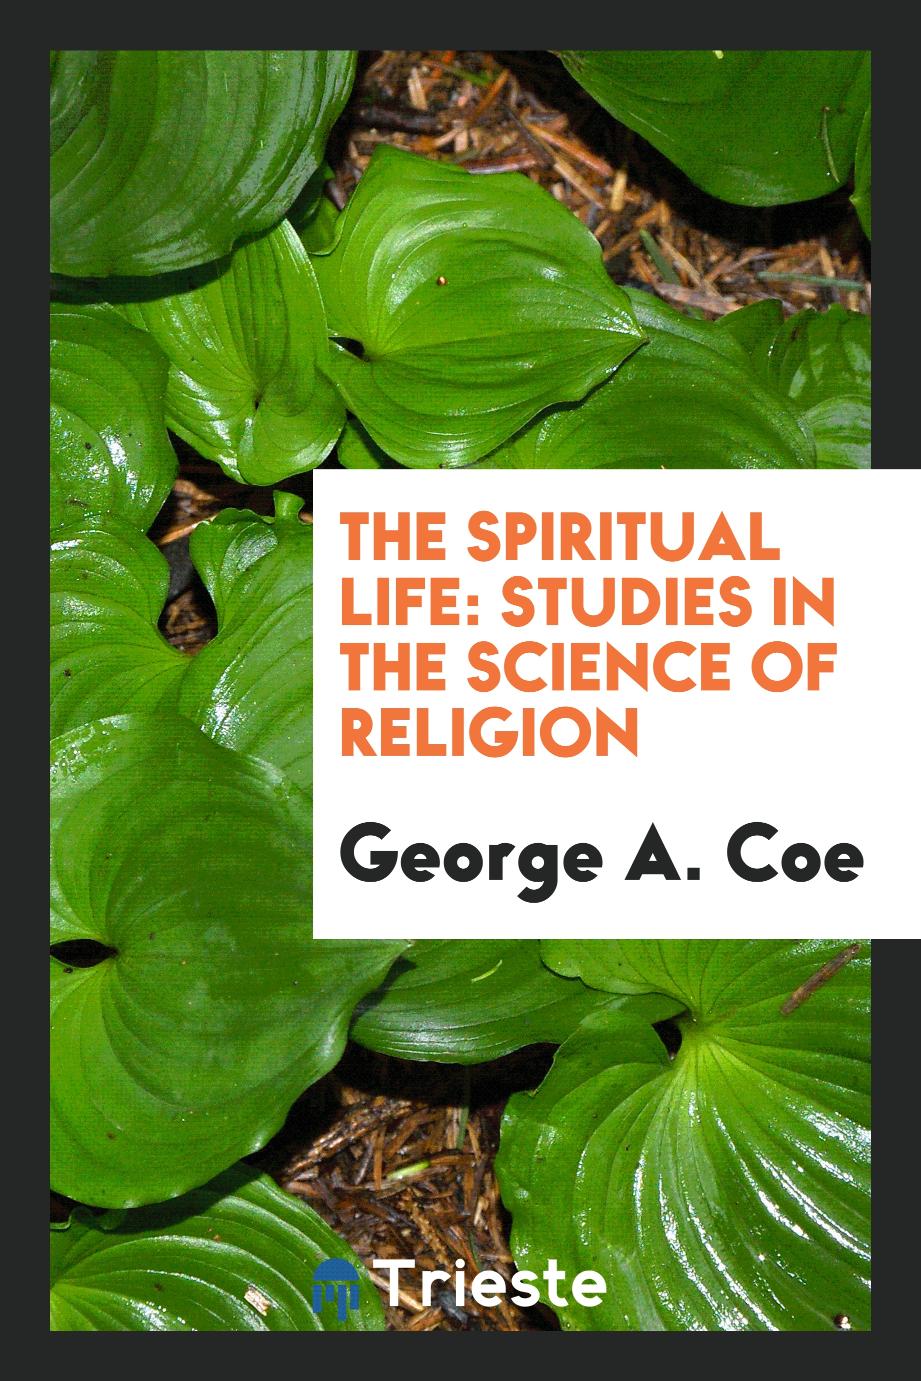 The spiritual life: studies in the science of religion